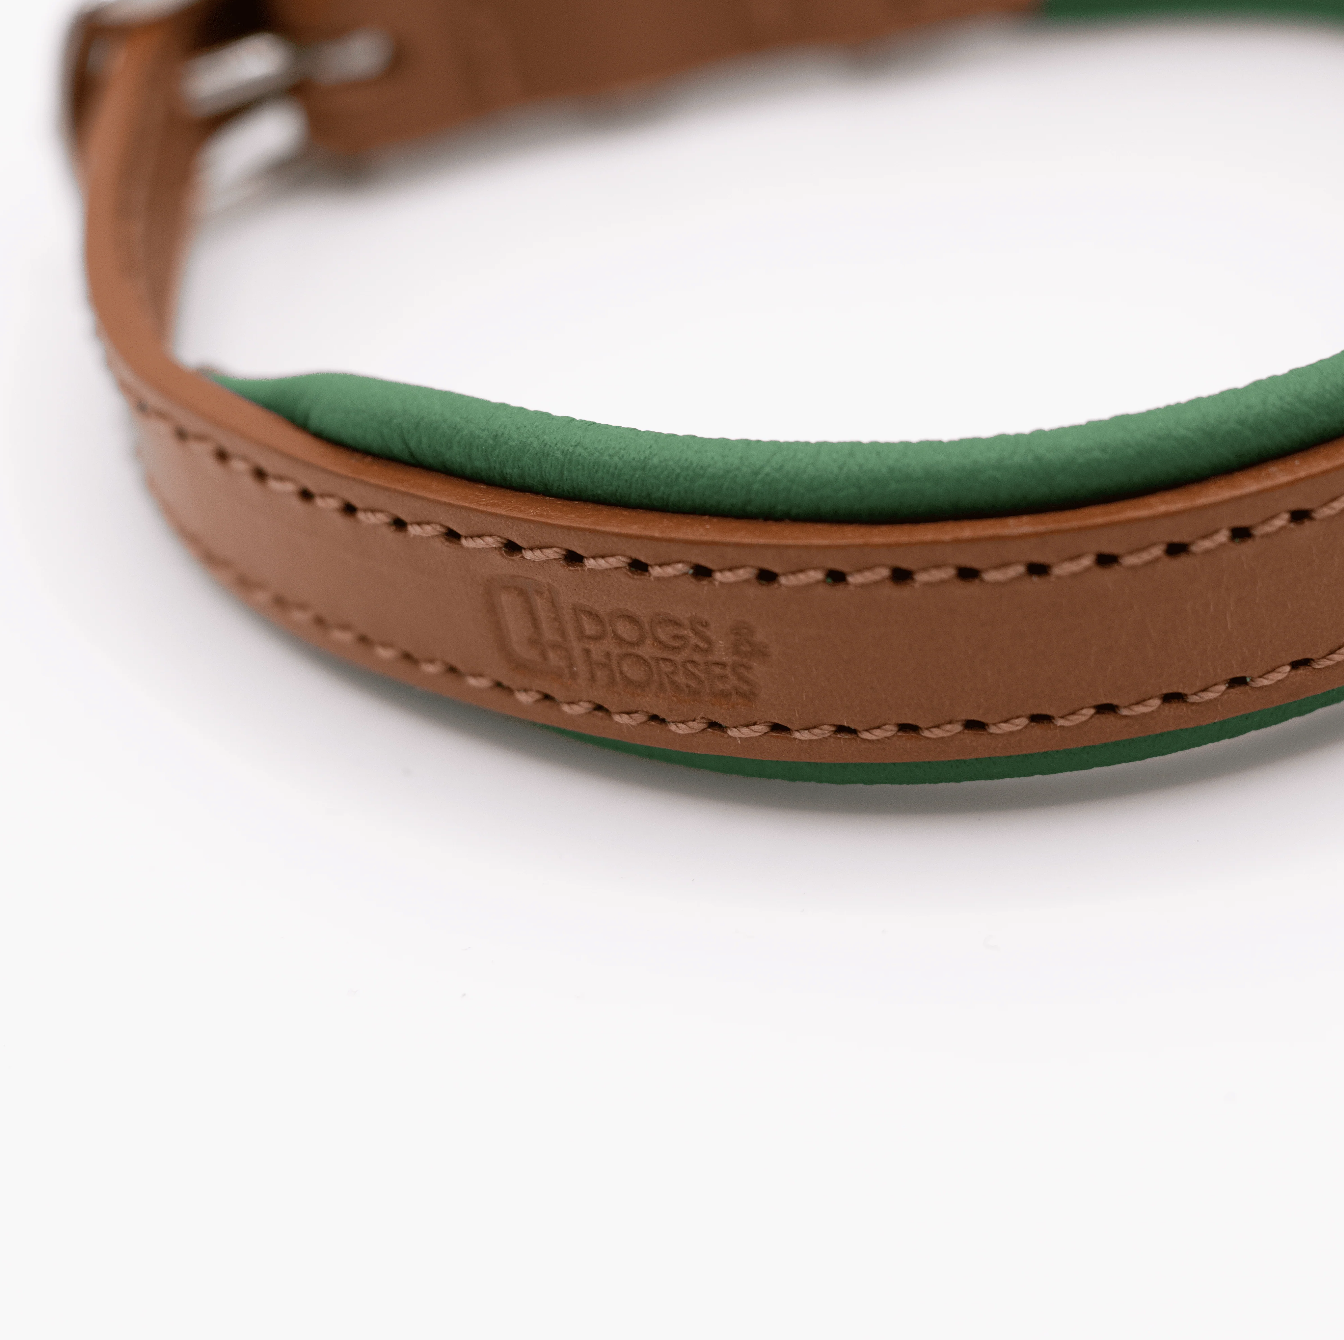 Padded Leather Dog Collar Tan and Clover